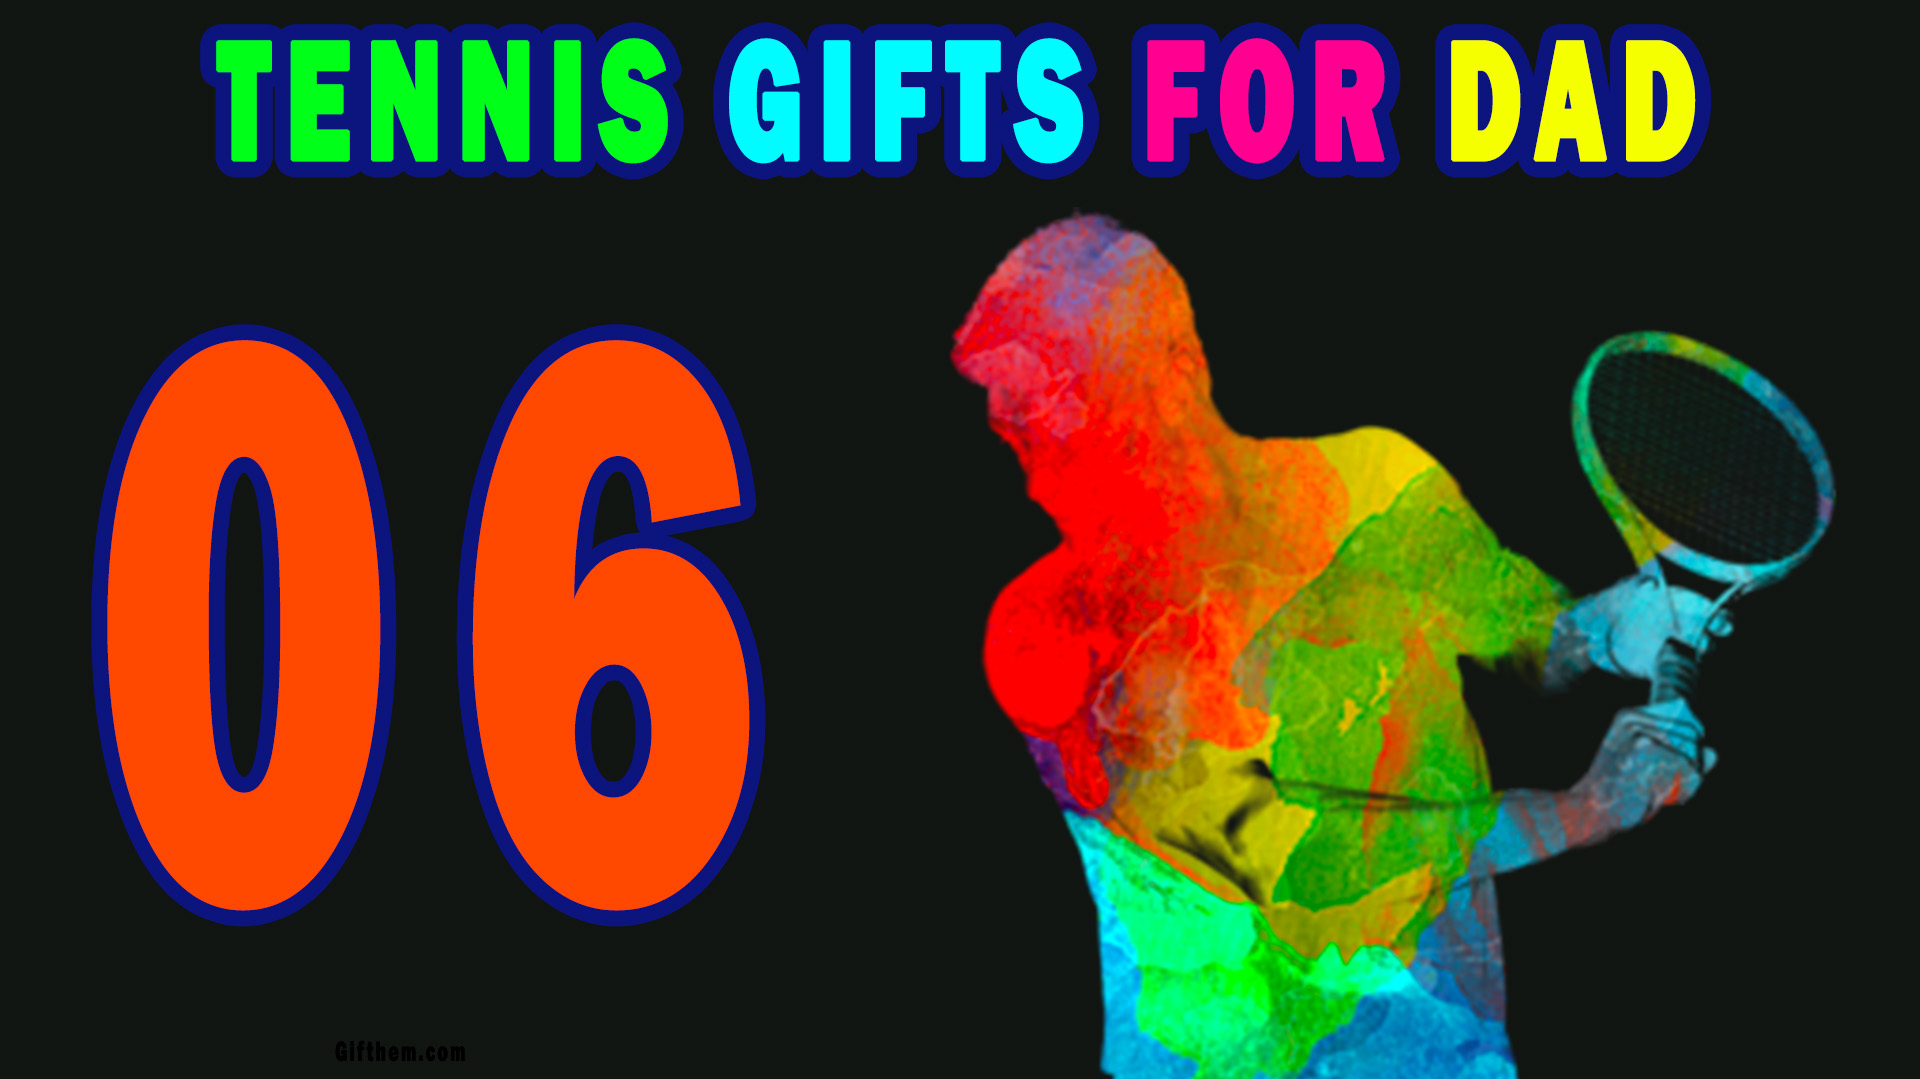 Tennis Gift Ideas For Dad